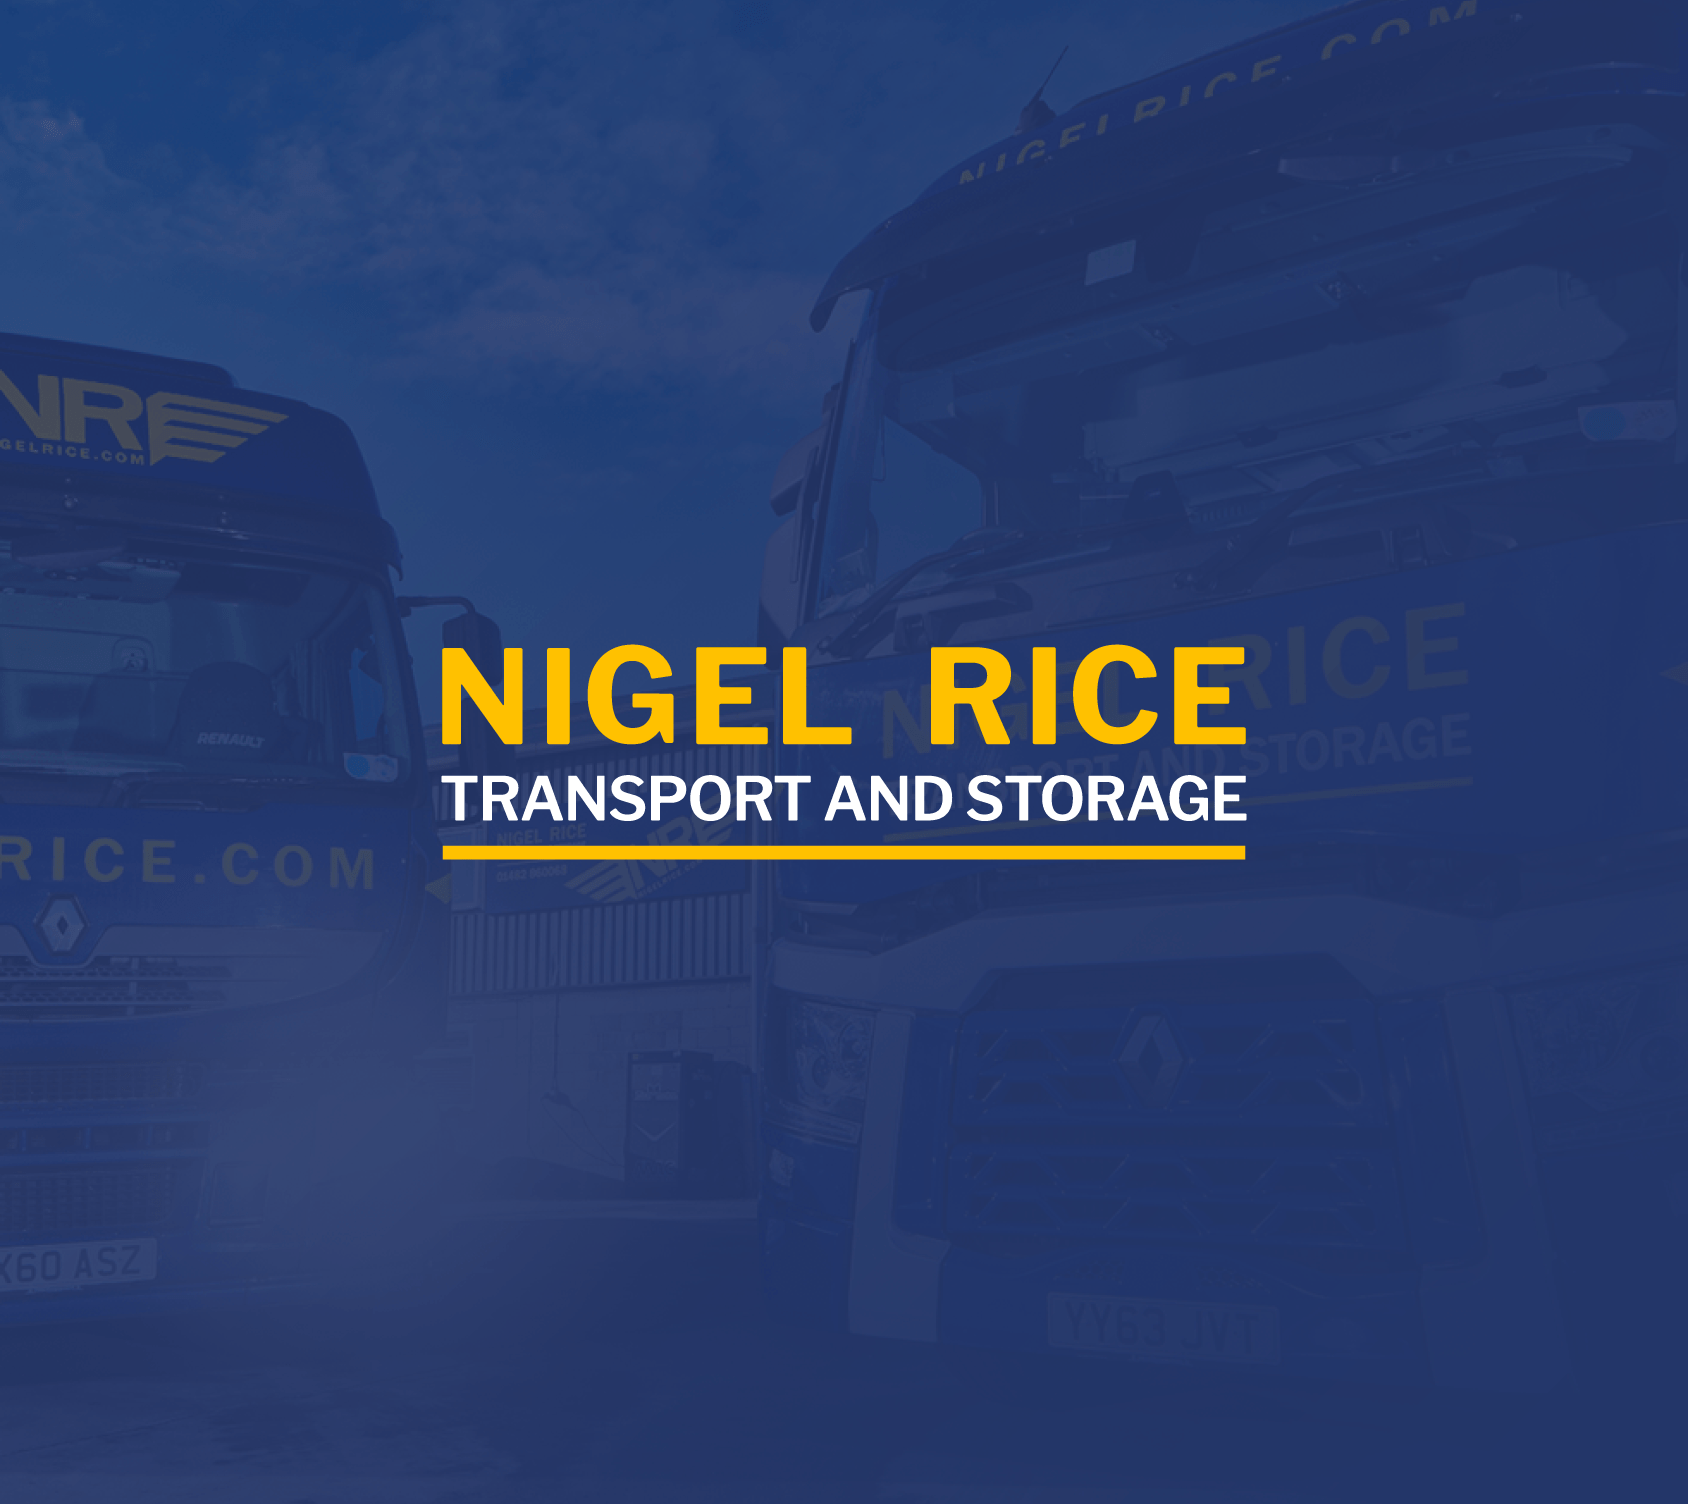 How to Choose the Perfect Transport Partner, Transport Distribution Hull, Nigel Rice